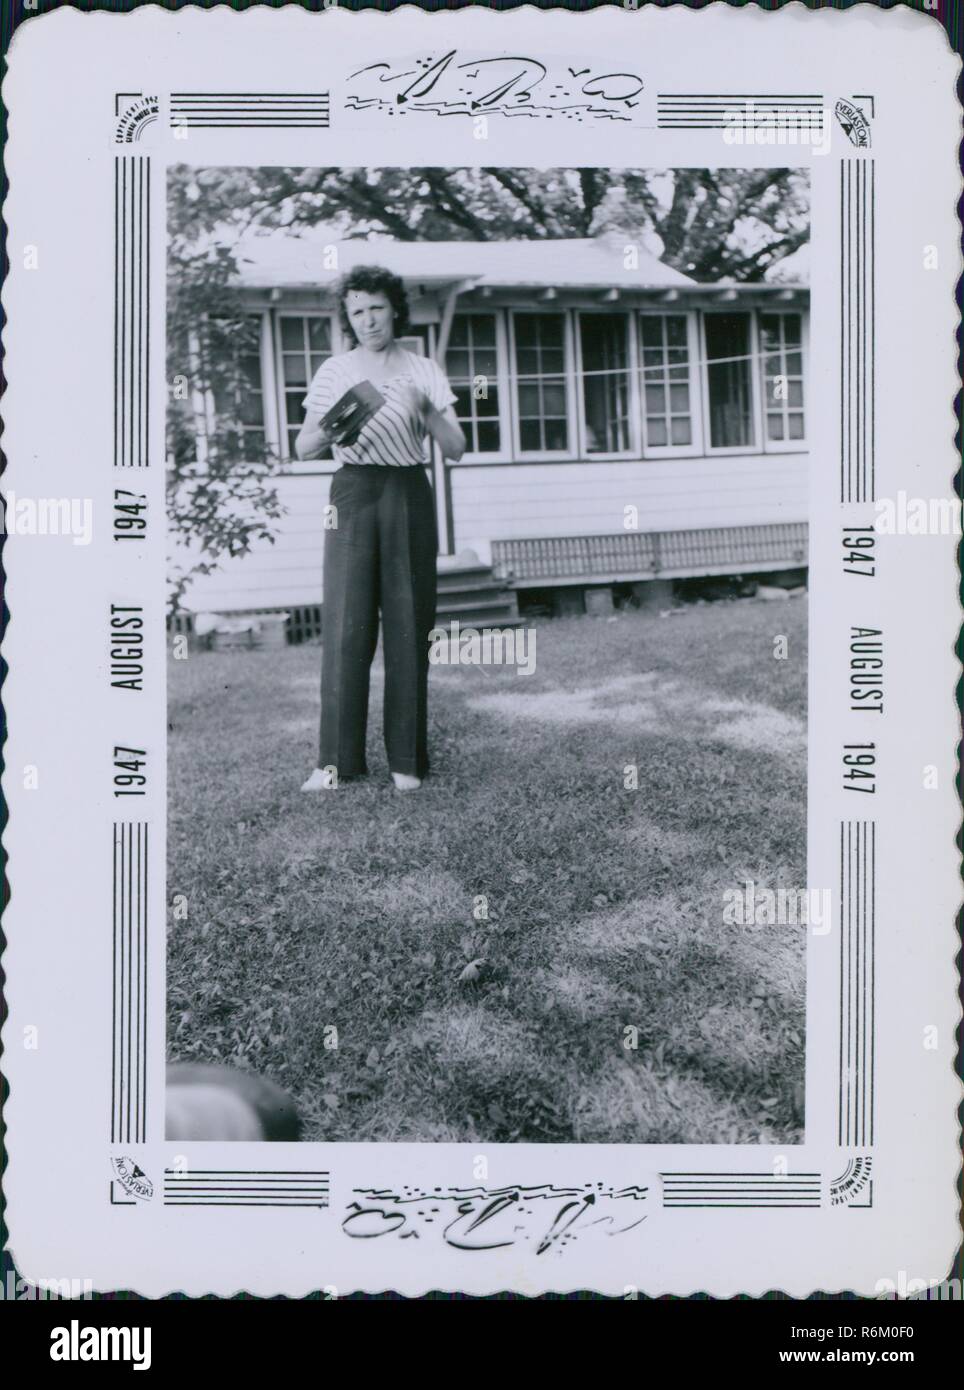 Woman standing on the lawn of a suburban home and holding a Kodak Brownie box camera, an iconic early 20th century camera, printed with an ornate decorated frame, August, 1947. () Stock Photo